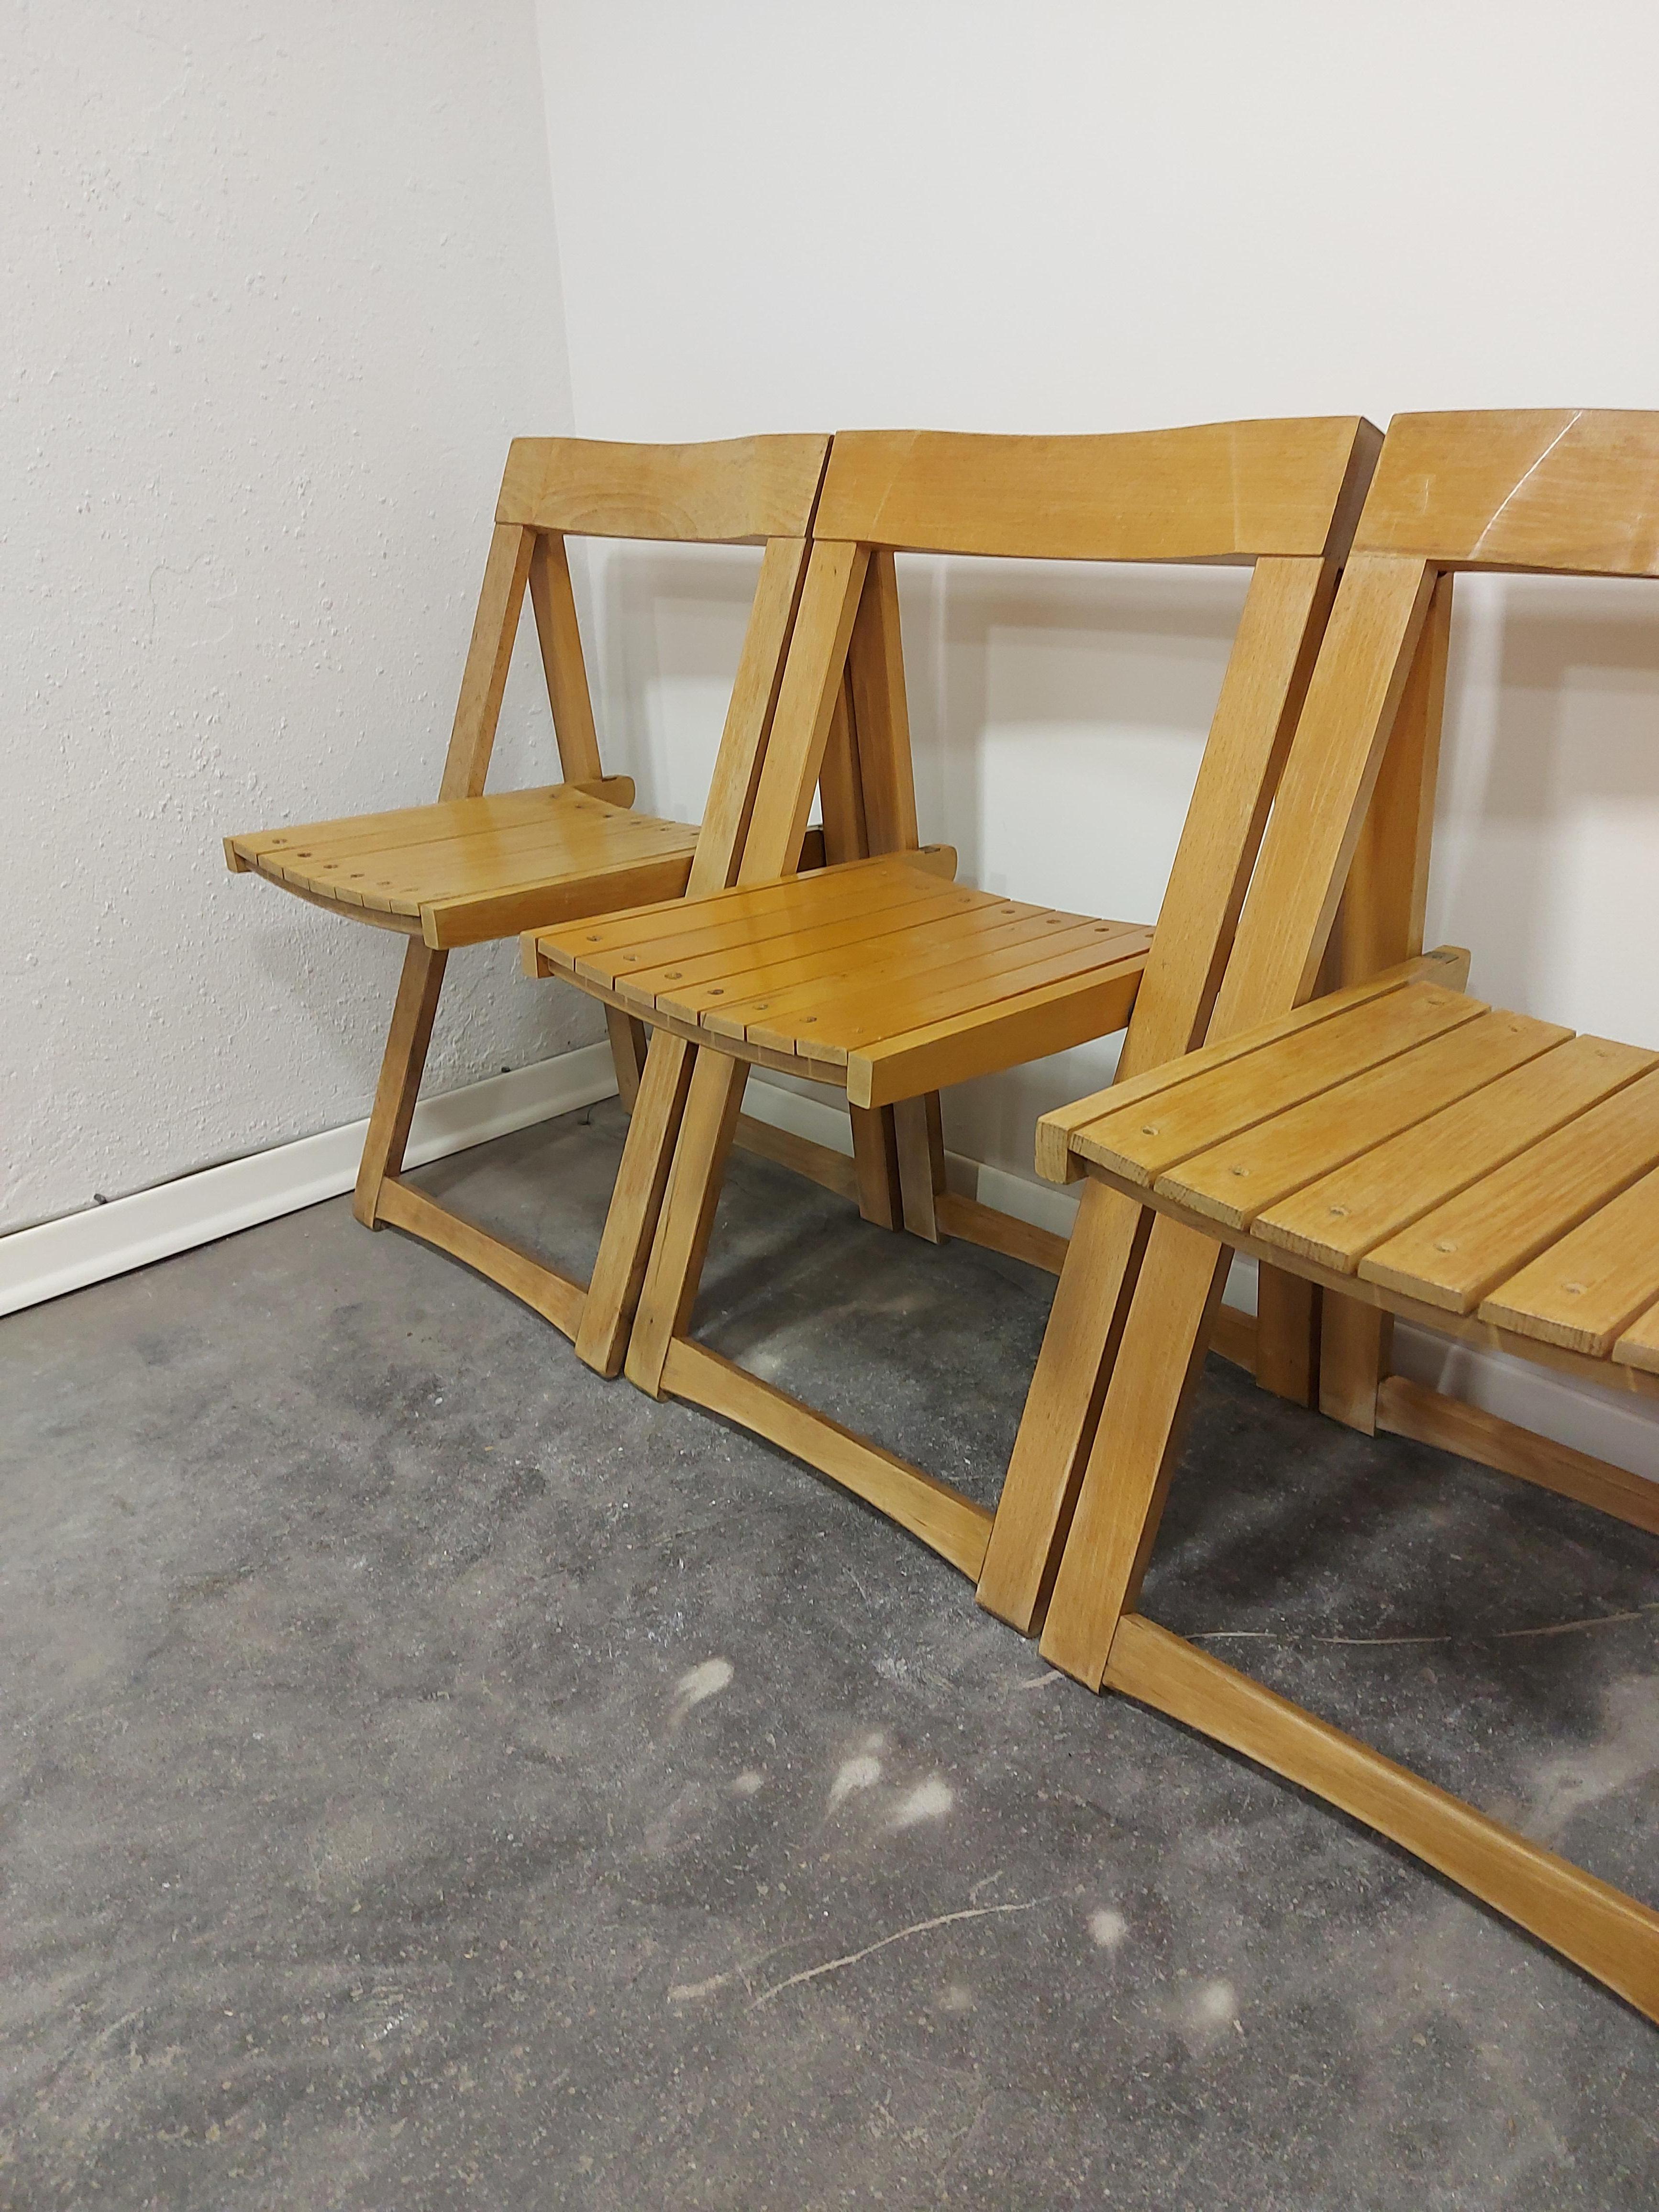 Mid-Century Modern Folding Chair by Aldo Jacober, 1970s 1 of 4 For Sale